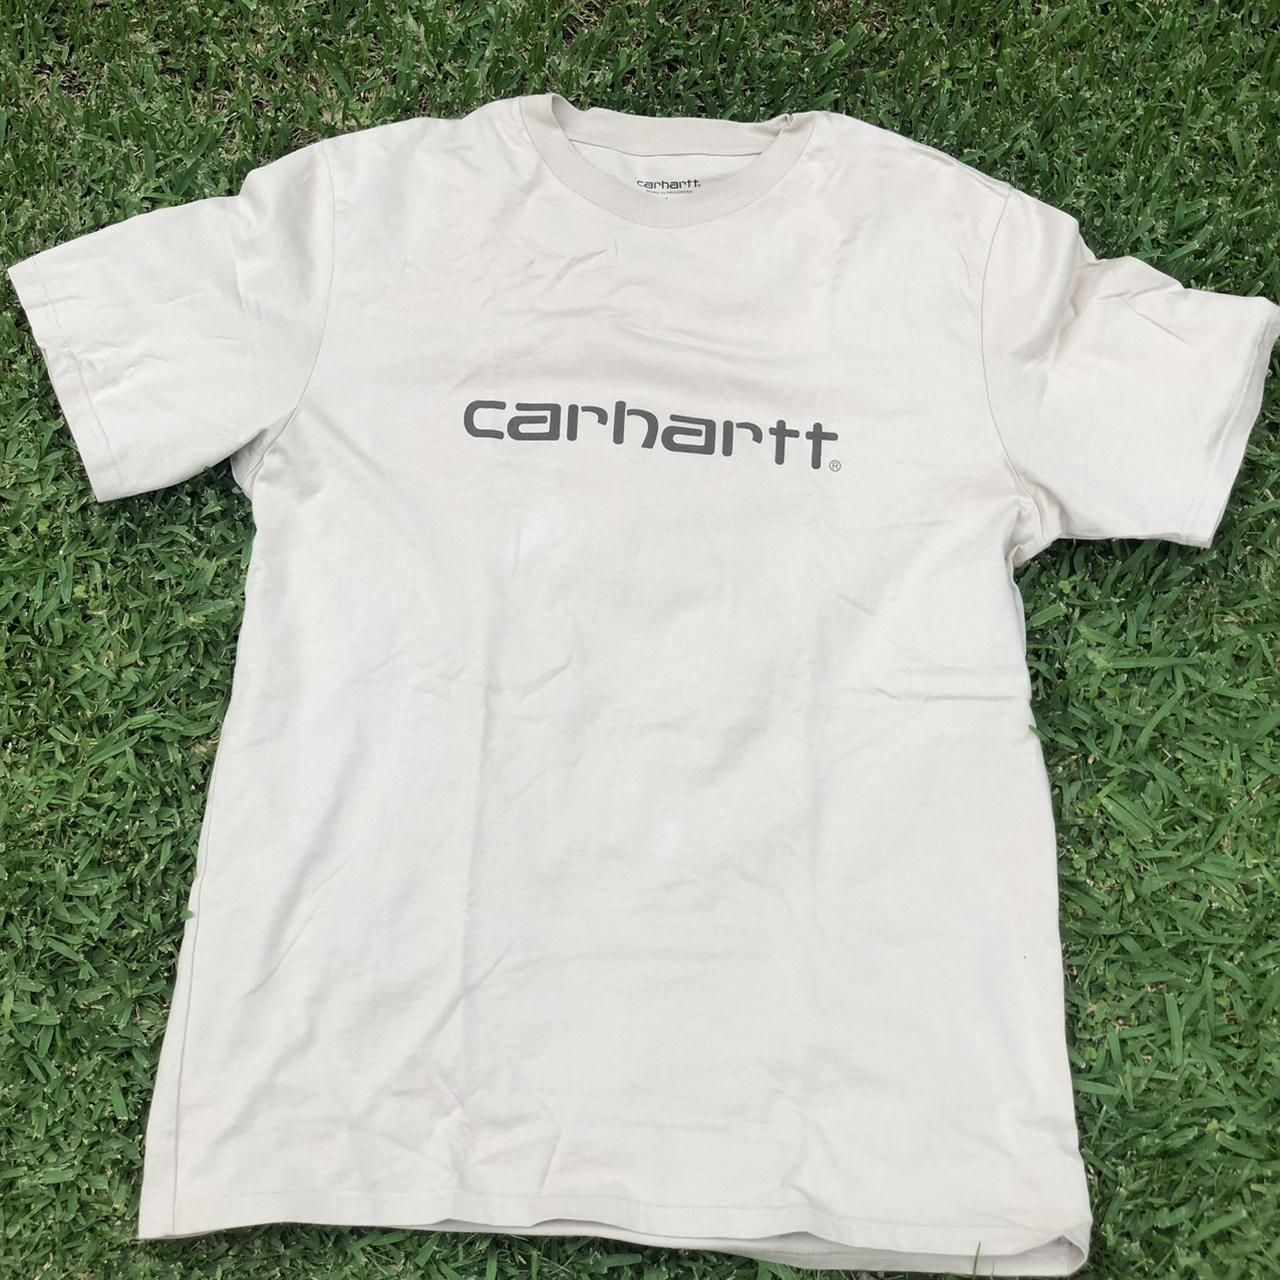 Mens Carhartt t shirt in great condition size large... - Depop